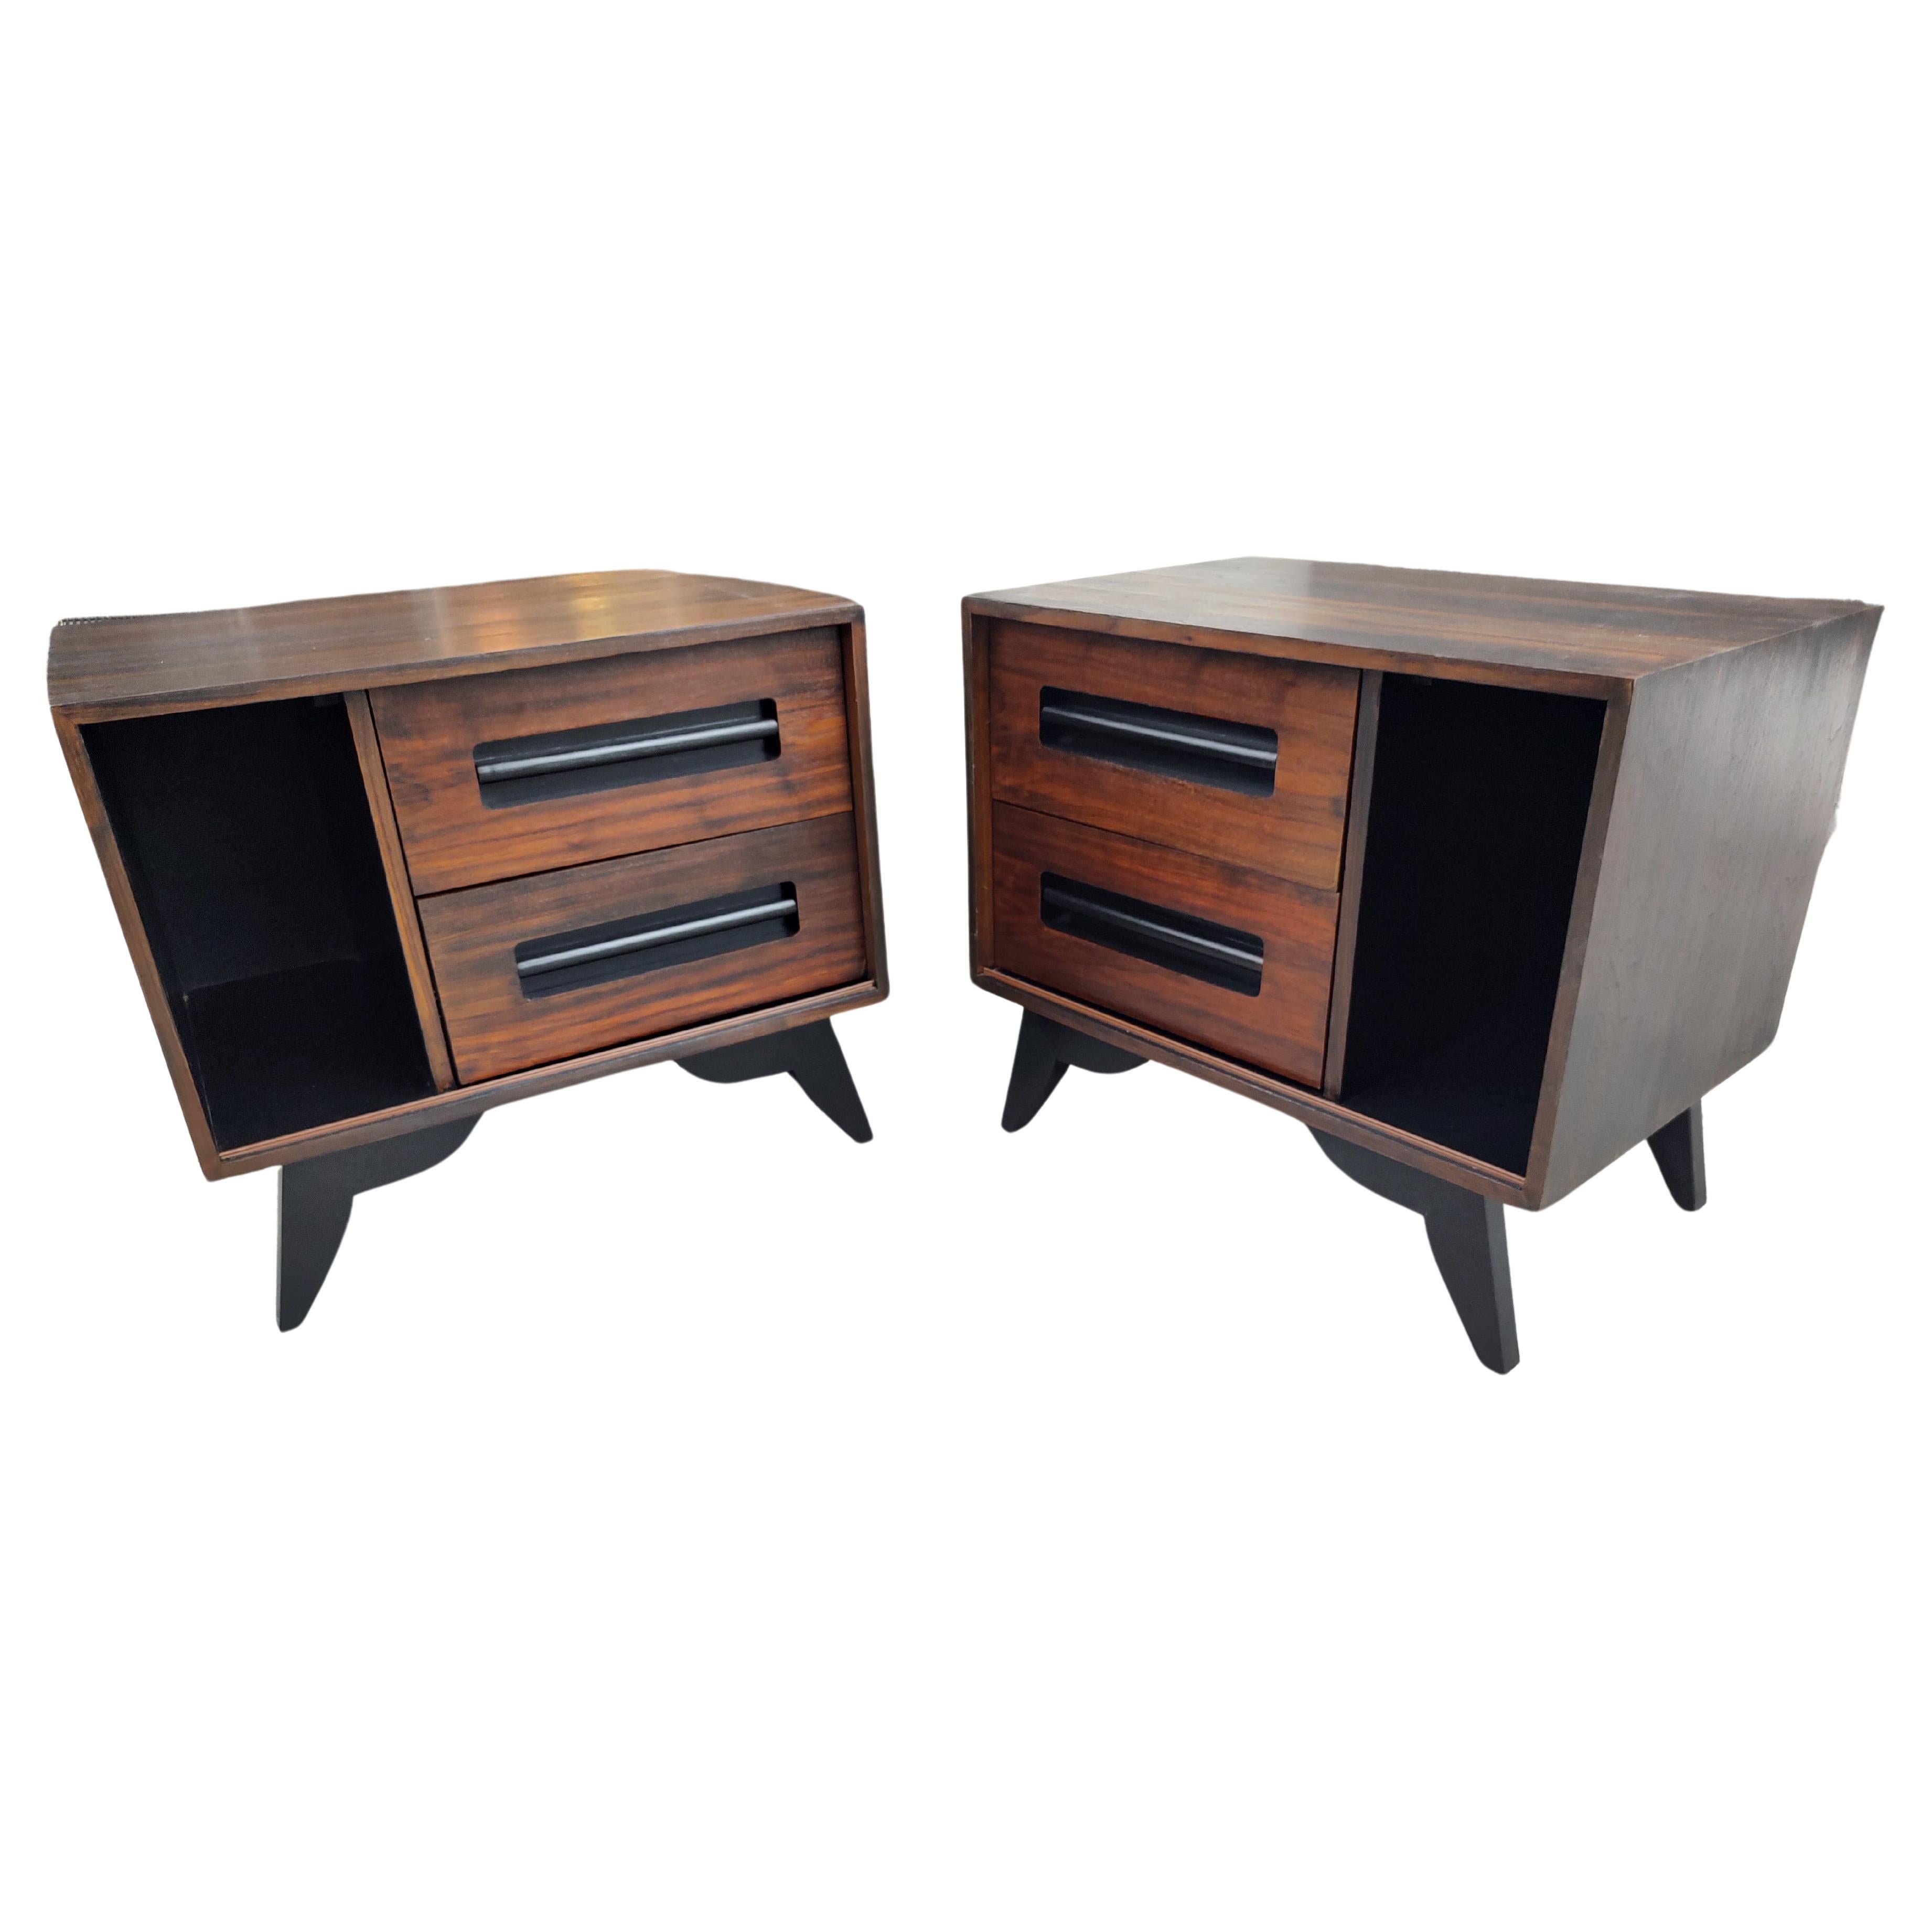 Late 20th Century Pair of Mid-Century Modern Danish Rosewood & Black Lacquer Nightstands C1970 For Sale